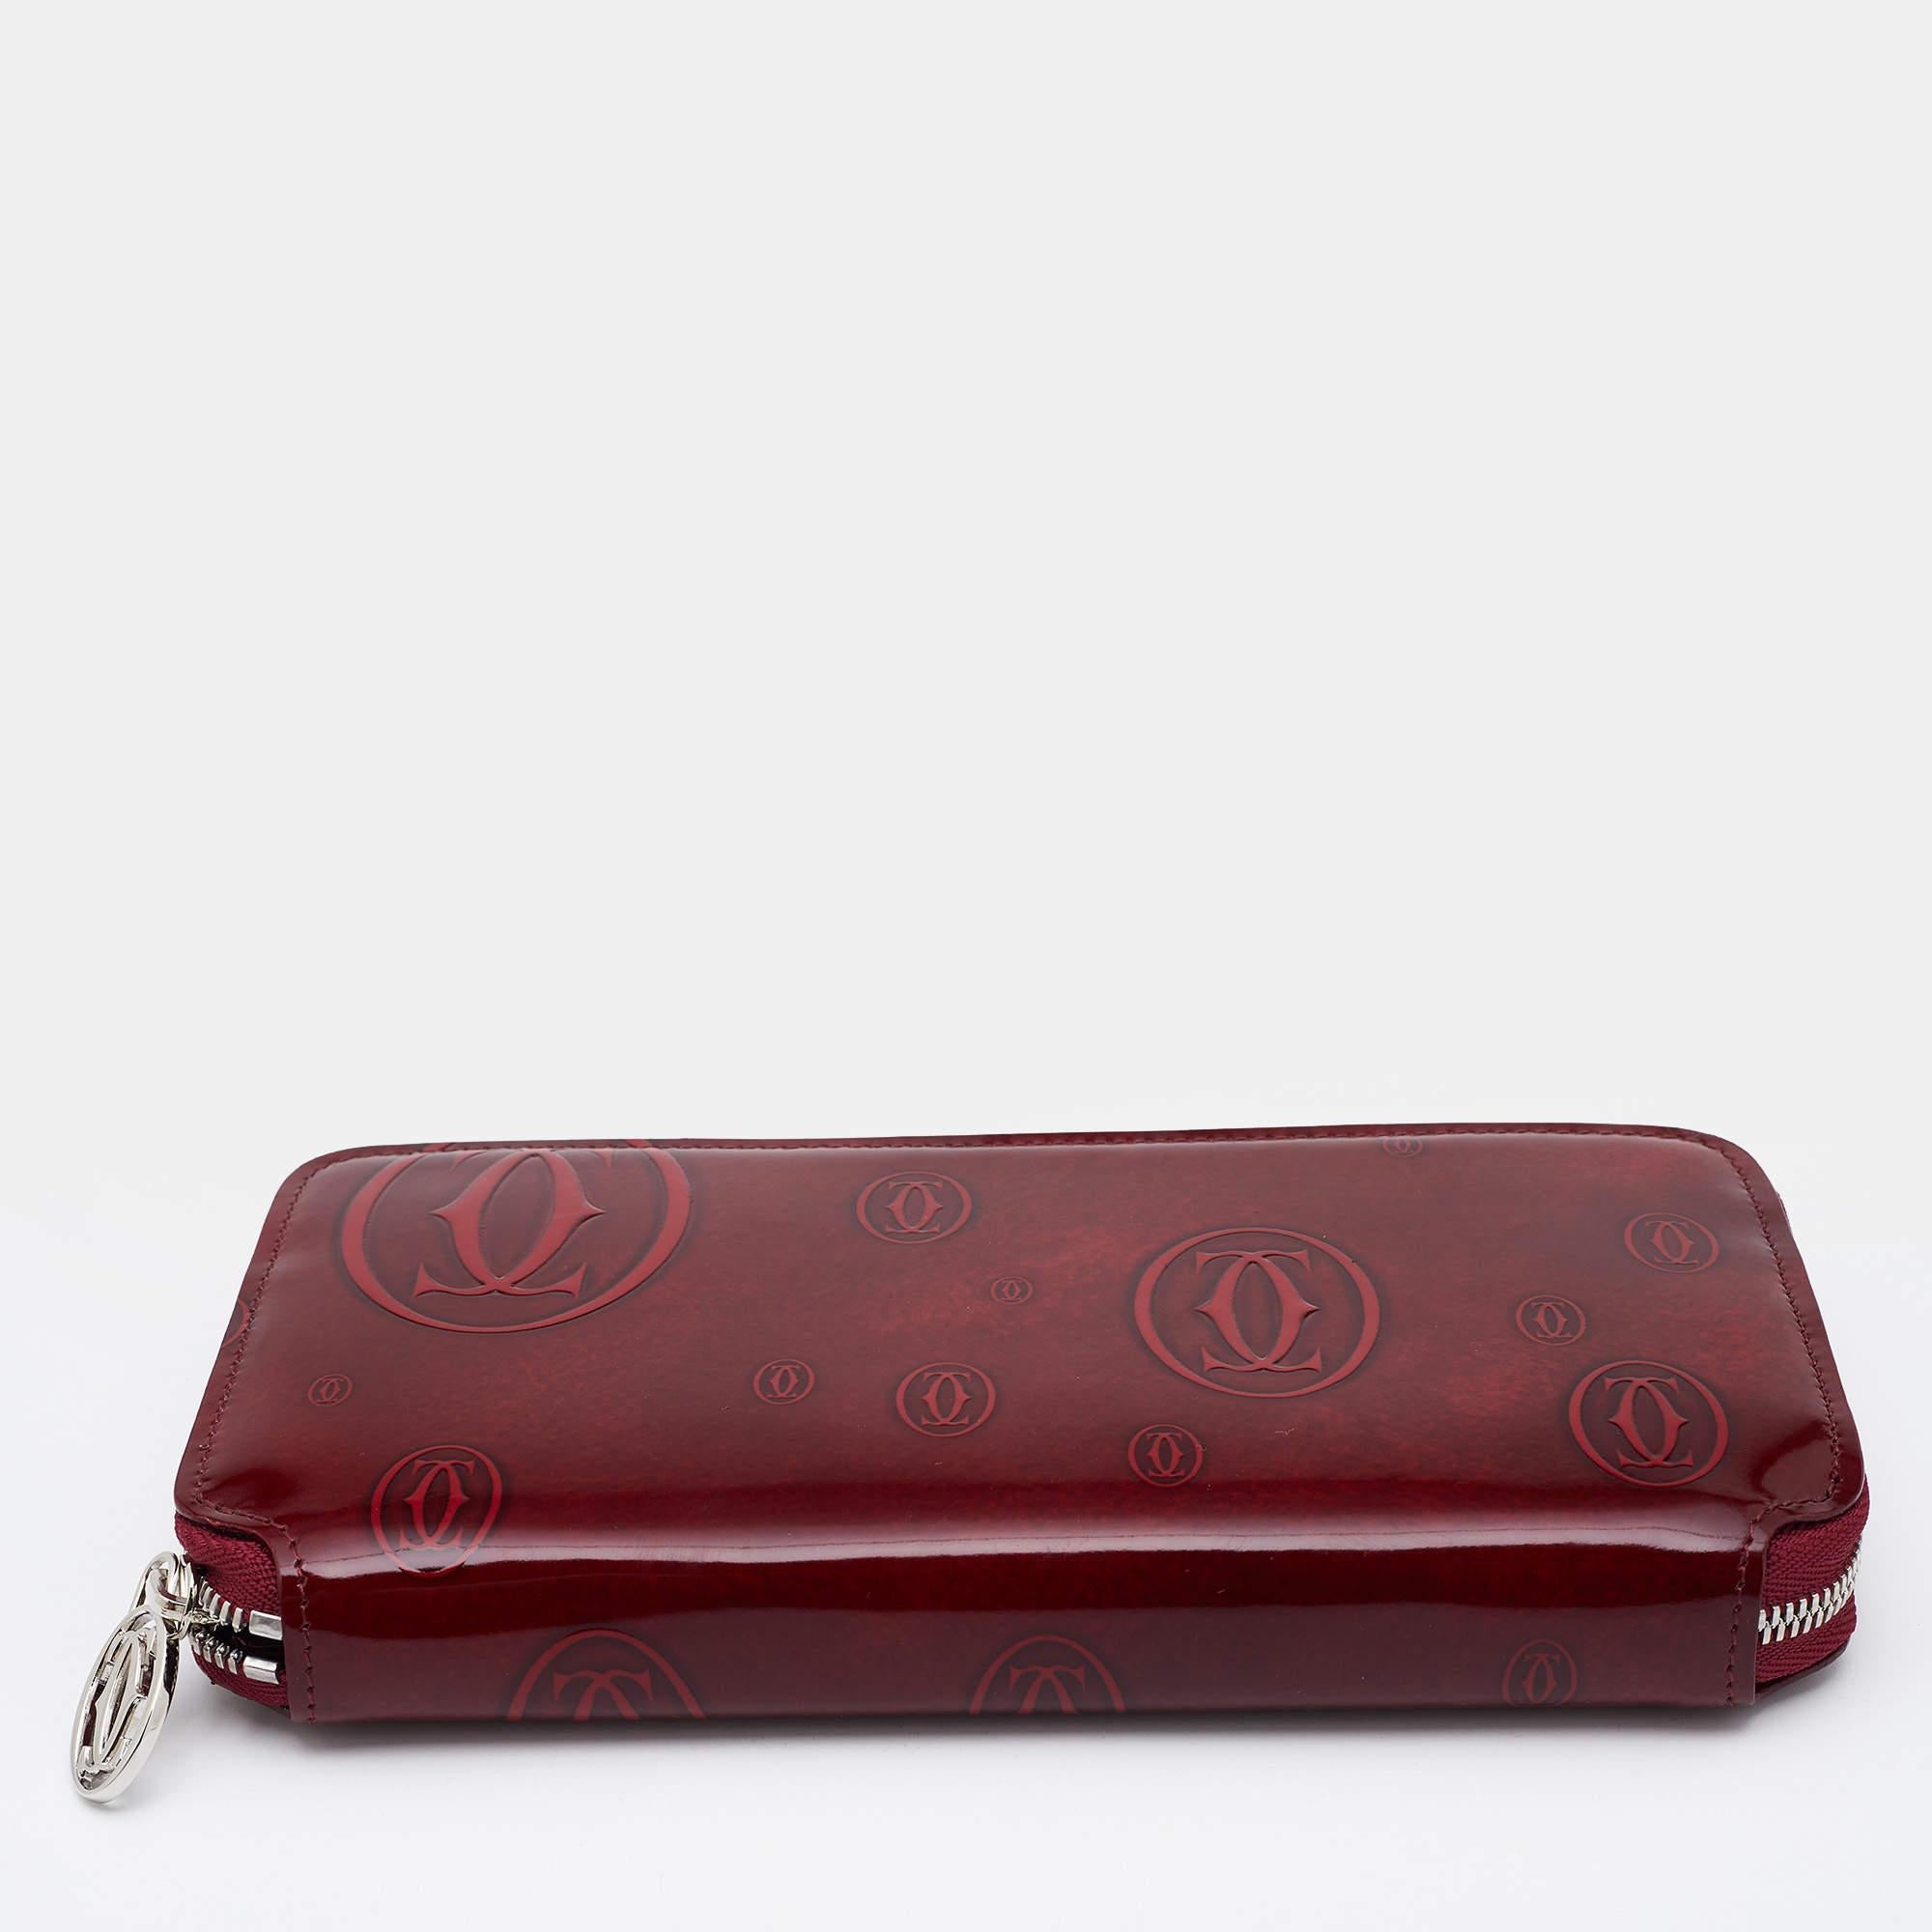 Cartier makes sure you stay at the top of your accessory game with this wallet. Designed to perfection and crafted from fine quality patent leather, it can be your go-to accessory. Effortlessly store your daily essentials with this wallet that comes